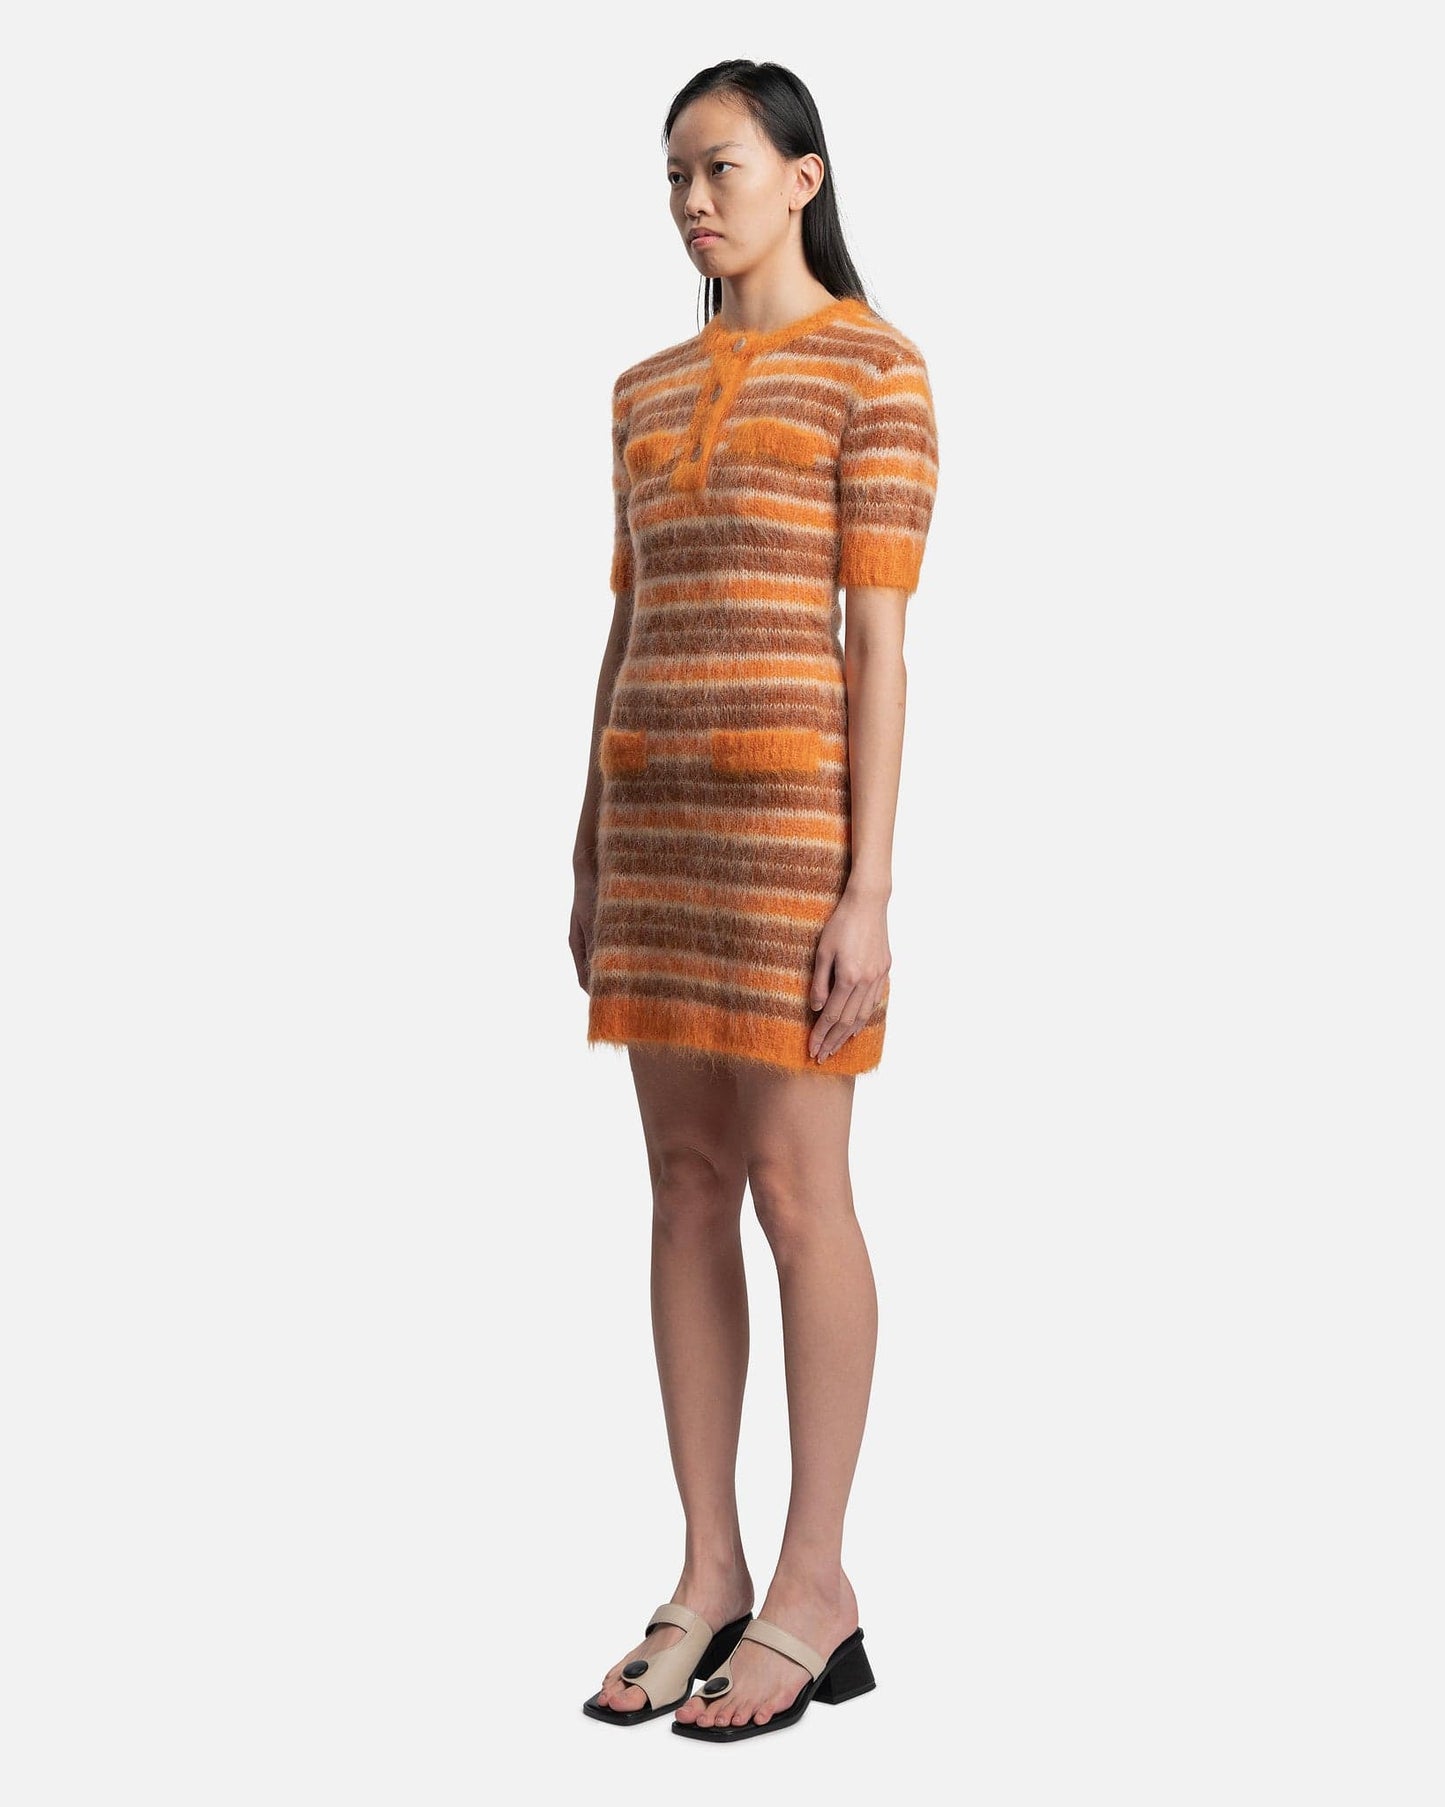 Marni Women Dresses Iconic Brushed Striped Dress in Clay